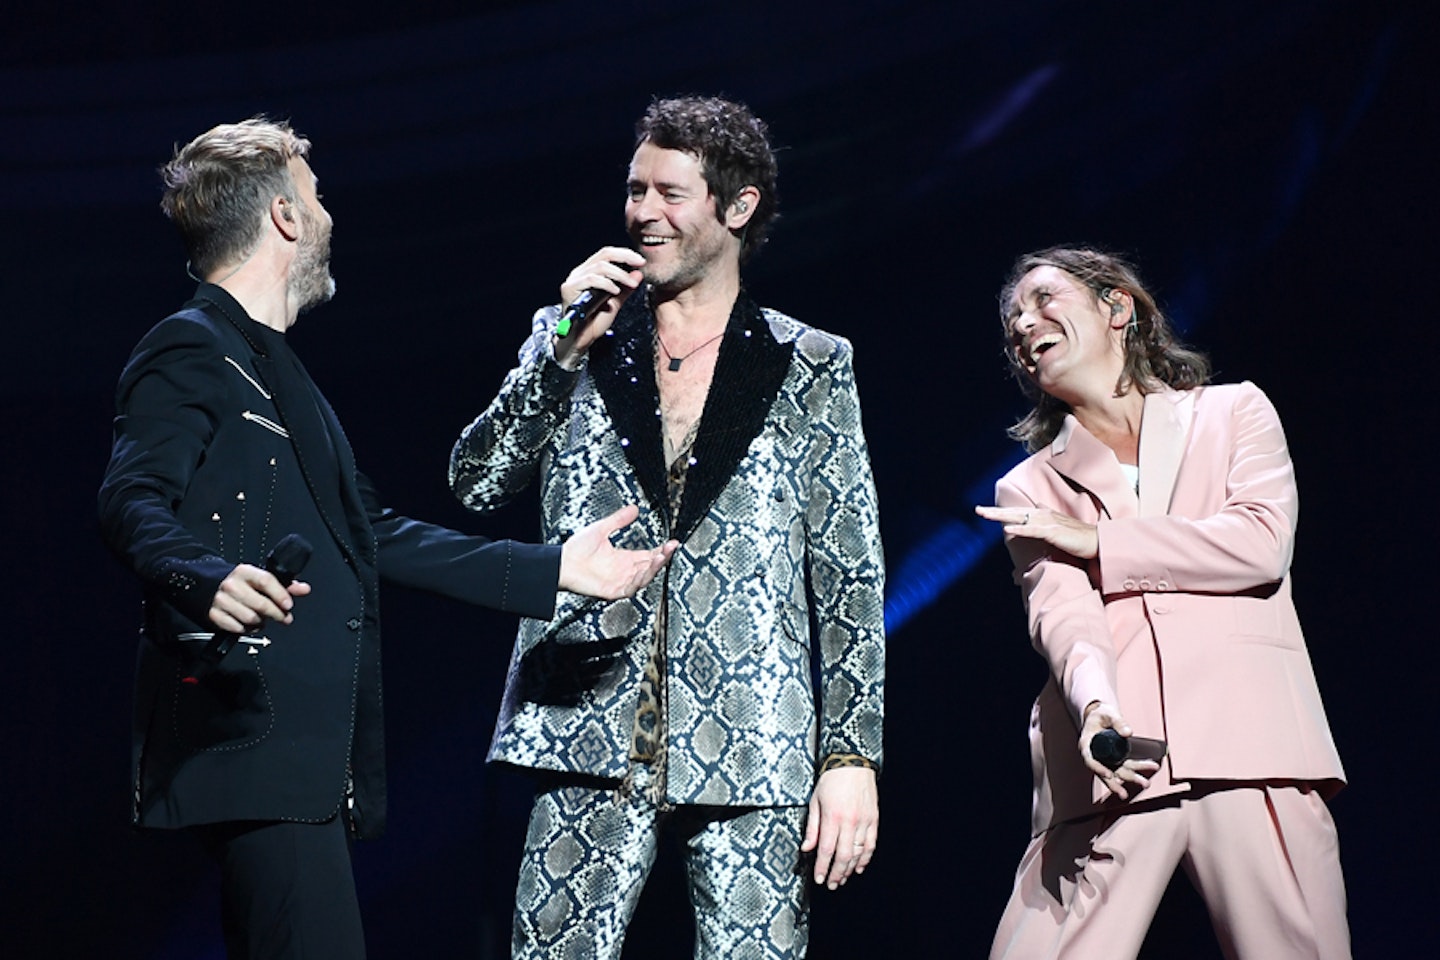 Take That on their Greatest Hits Live 2019 tour in Sheffield